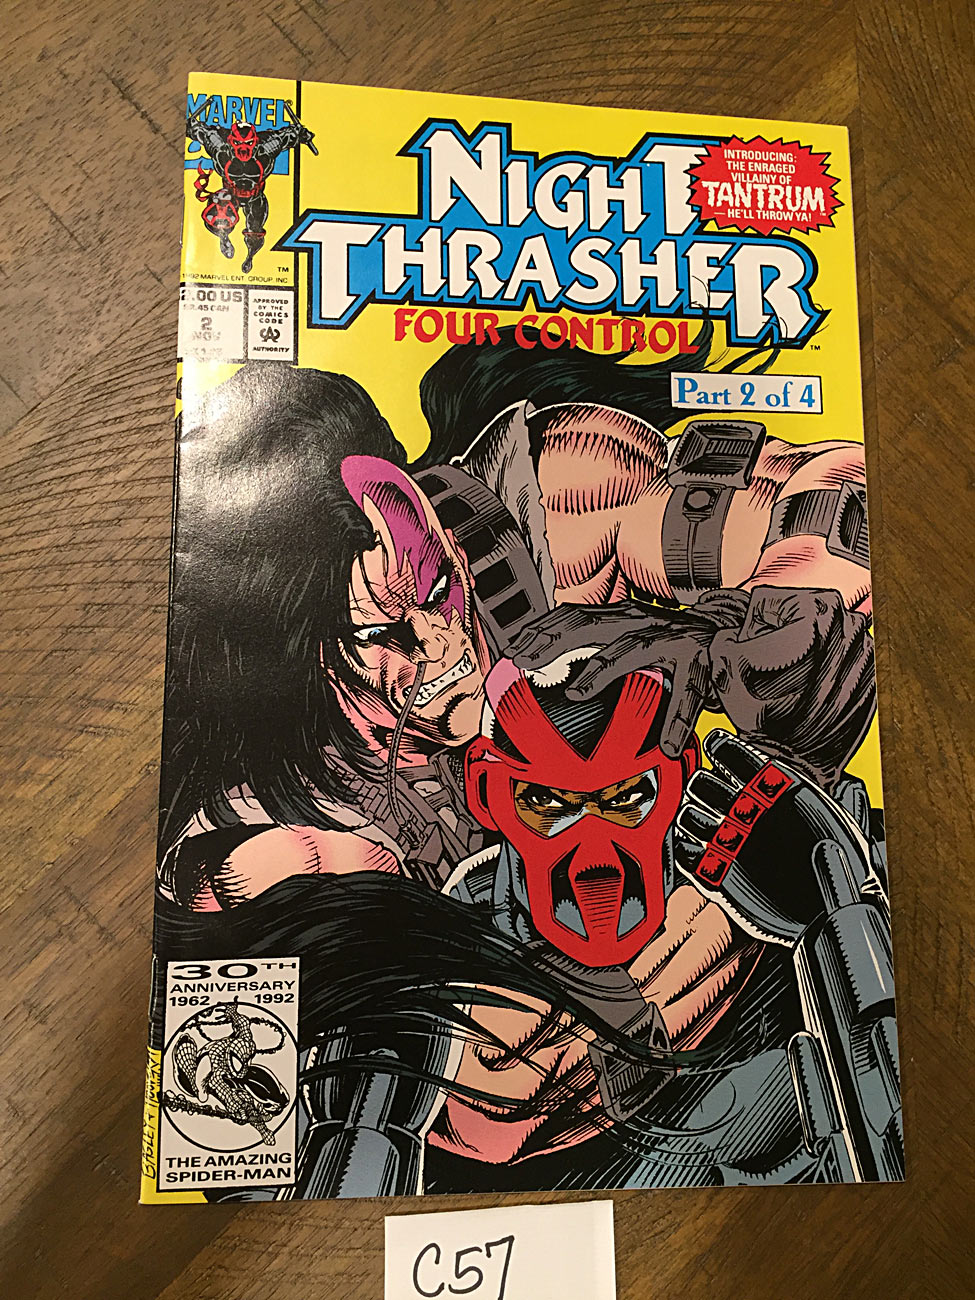 Night Thrasher: Four Control Comic Book Part 2 of 4 (November 1992) Introduction of Tantrum [C57]